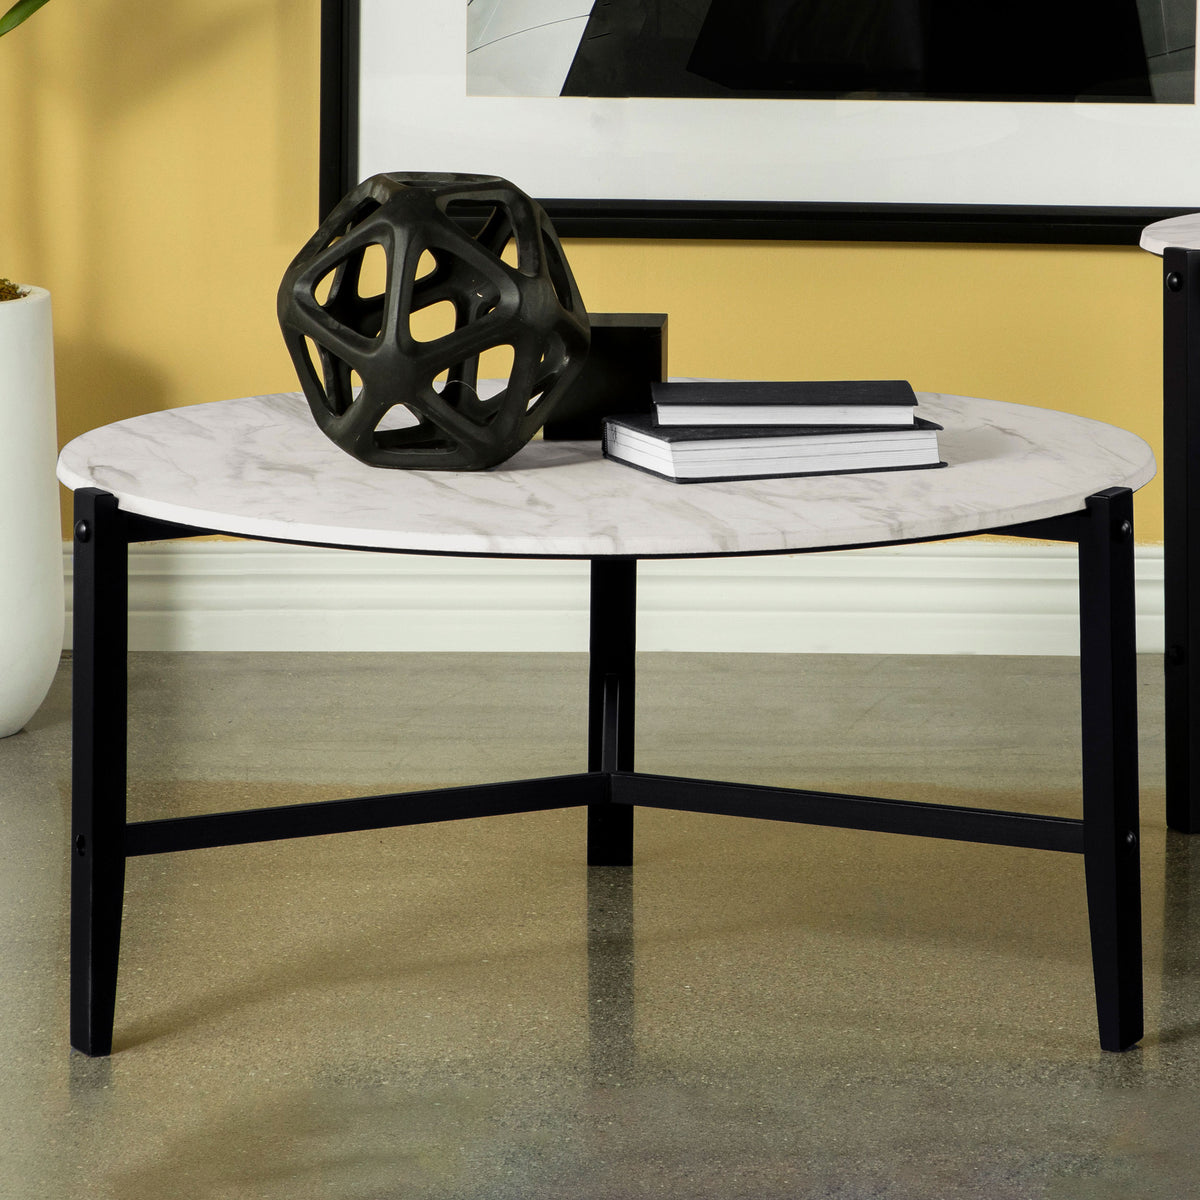 Tandi Round Coffee Table Faux White Marble and Black Tandi Round Coffee Table Faux White Marble and Black Half Price Furniture